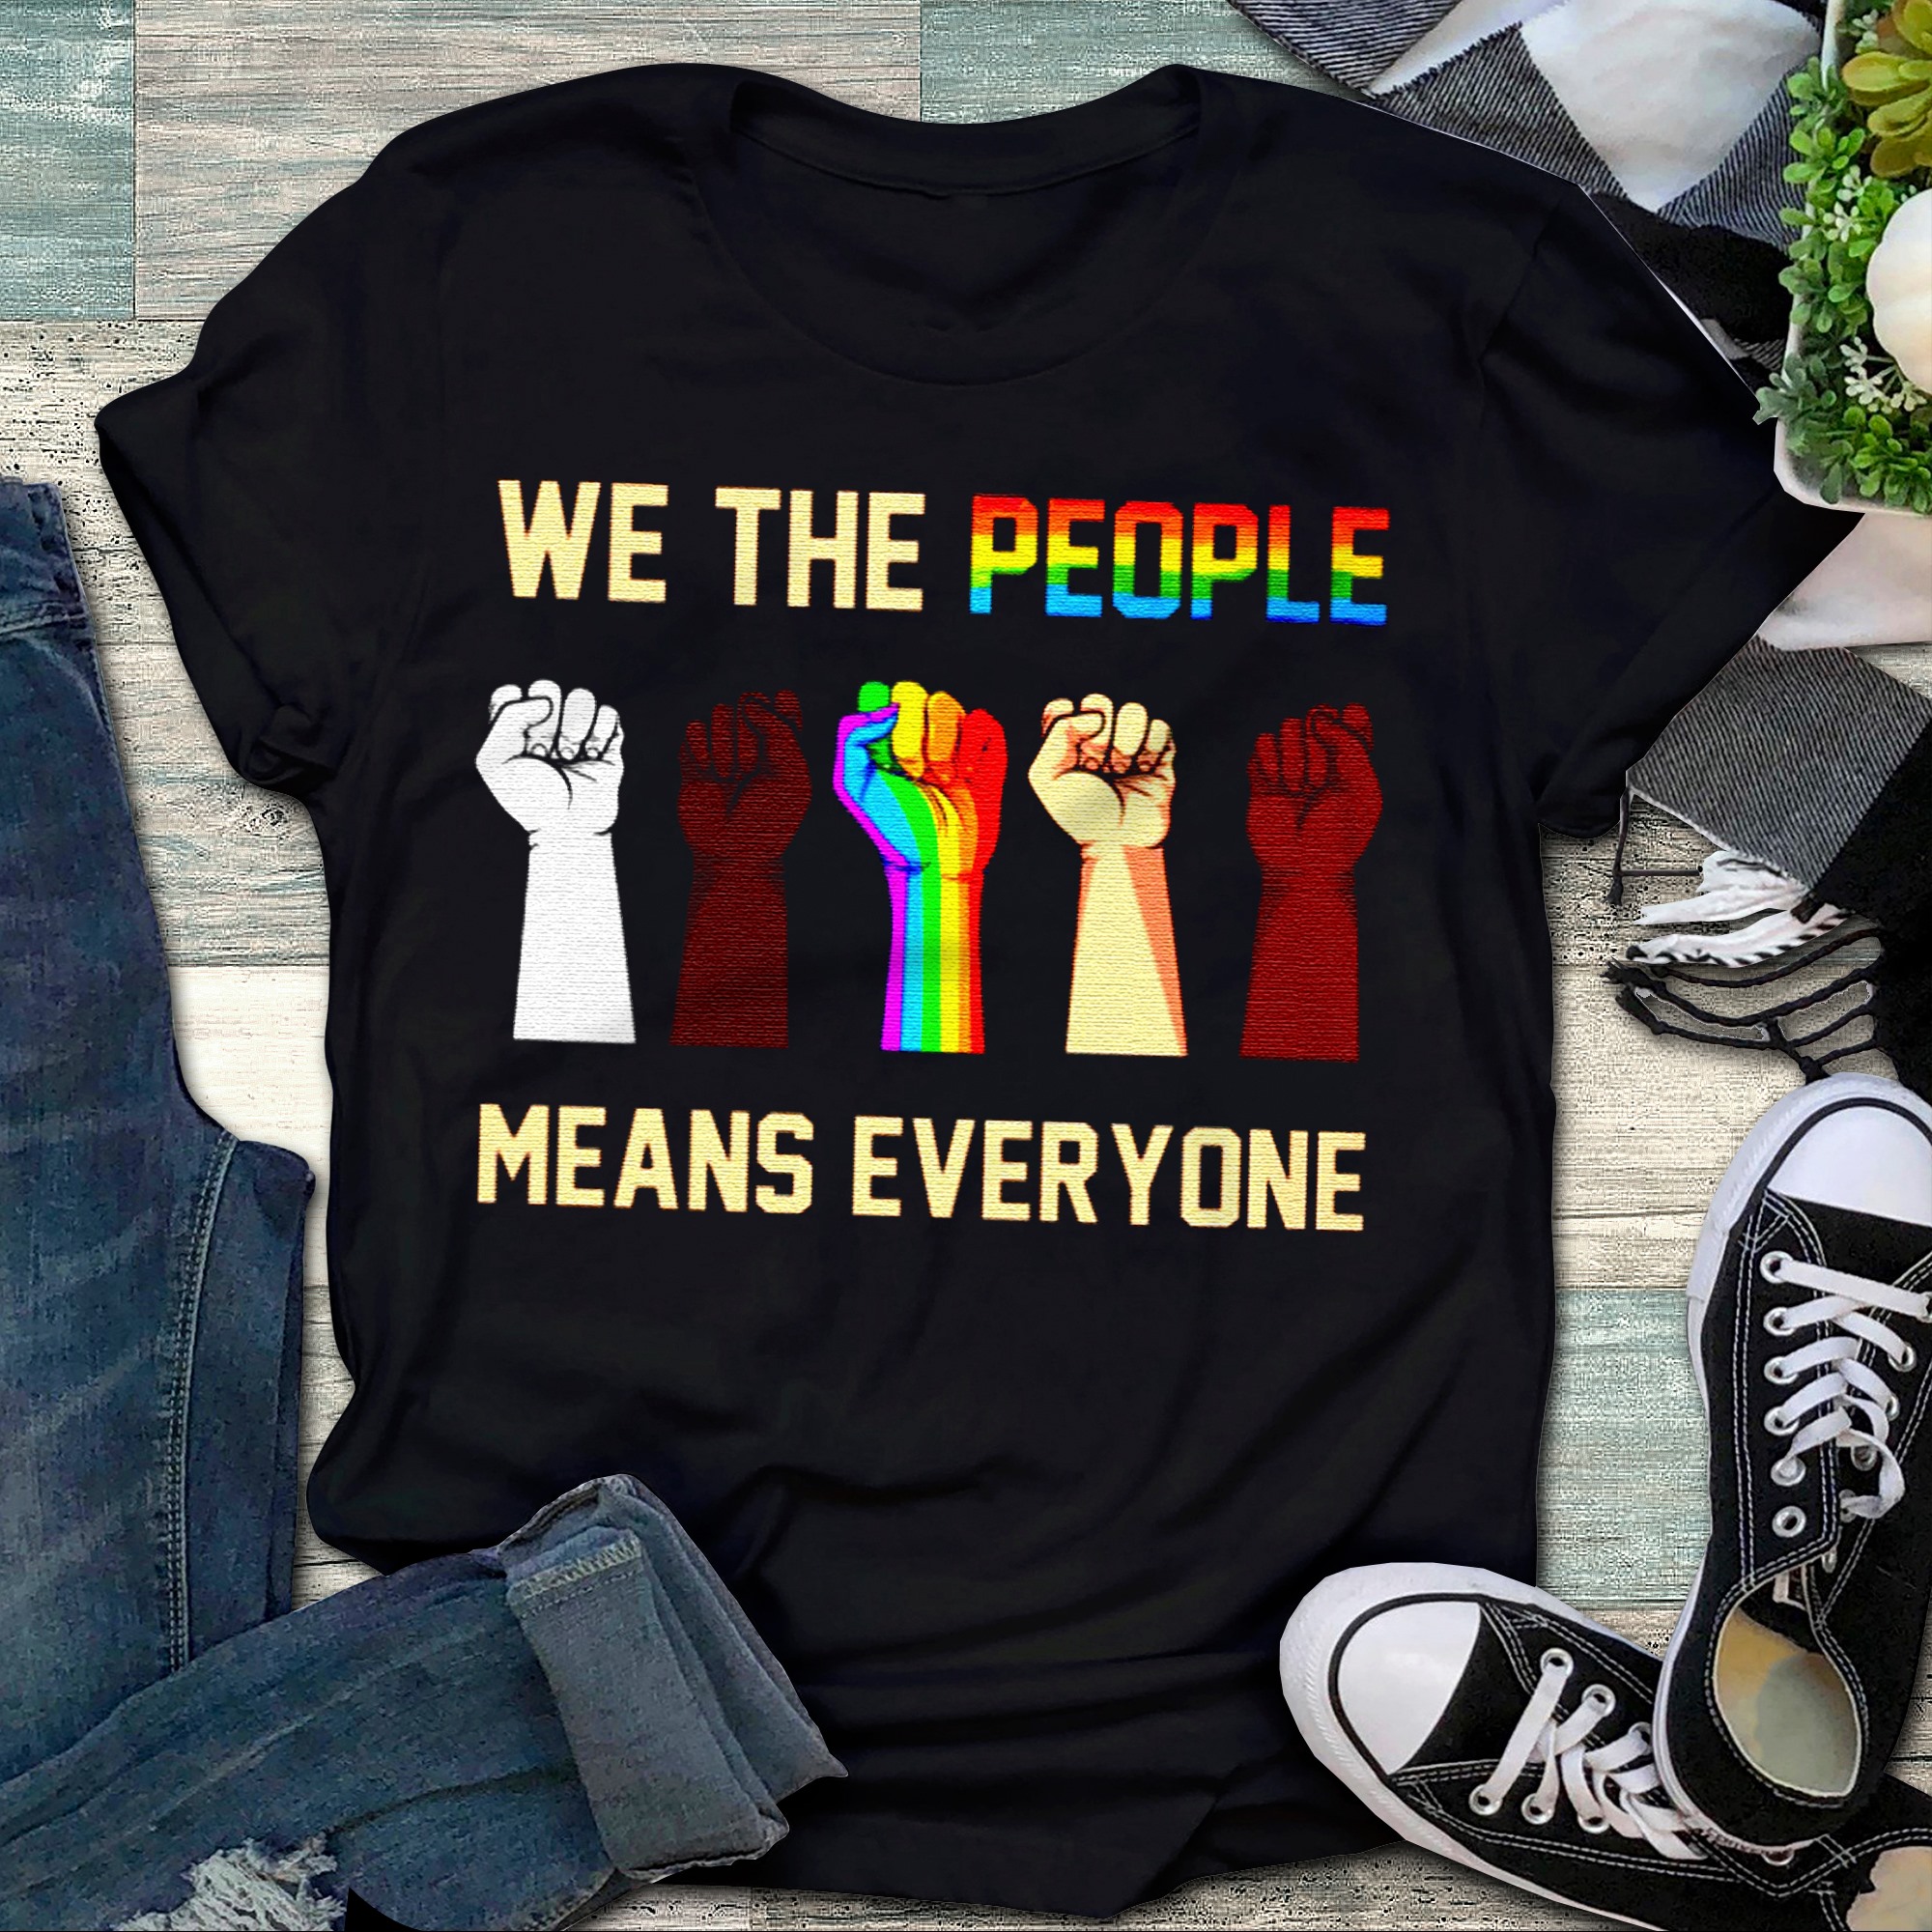 We the people means everyone - Lgbt community, black community, asian community